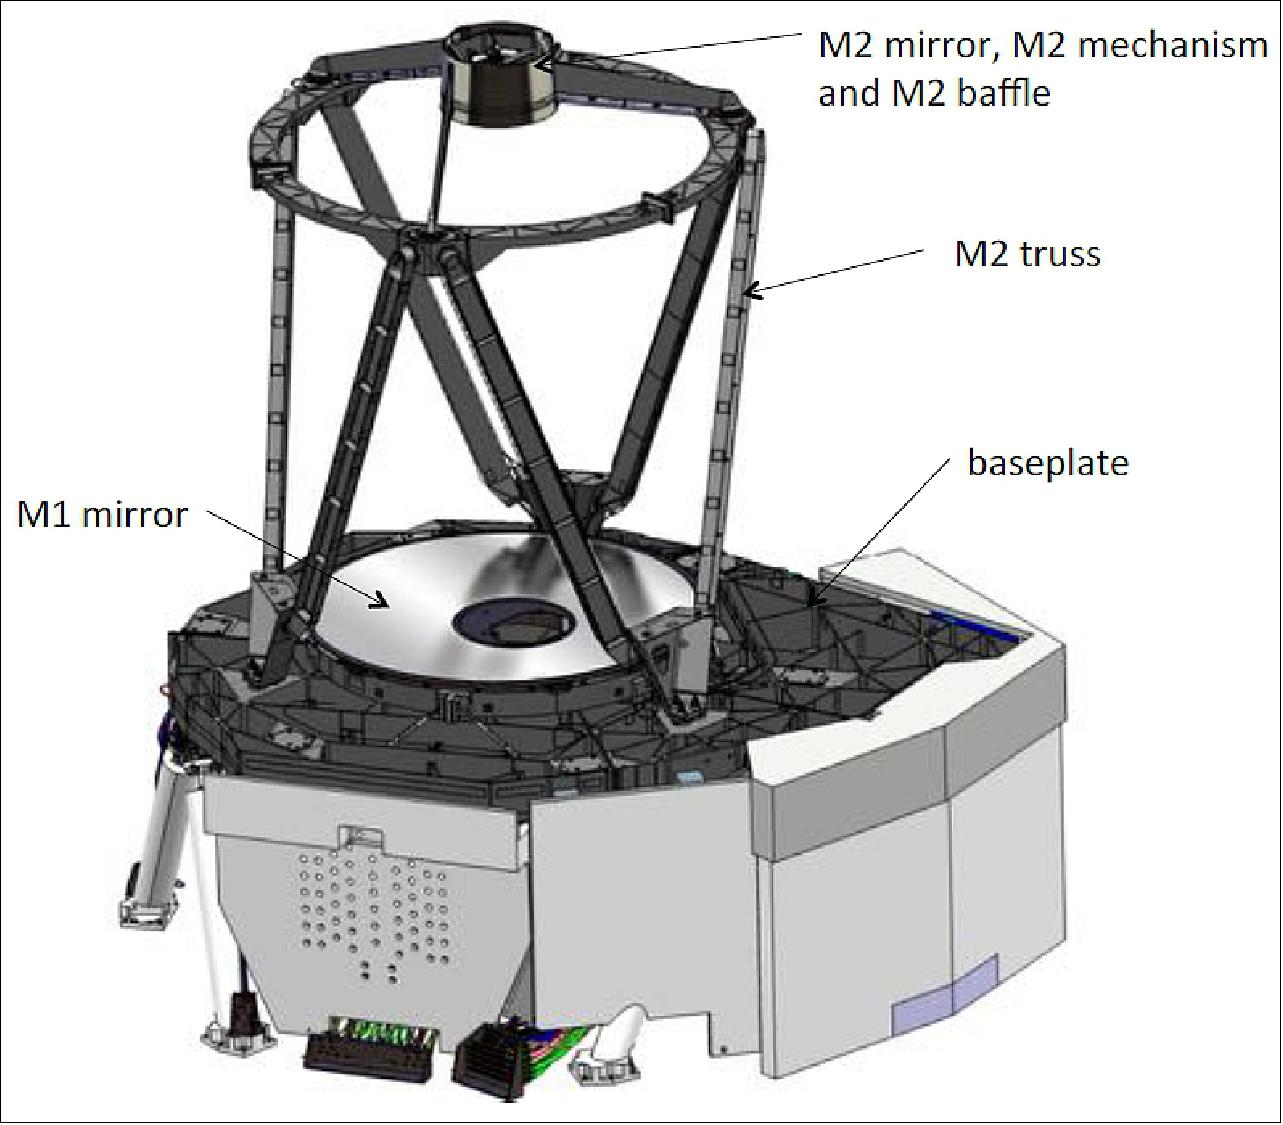 Figure 15: External front view of the PLM without the external baffle (image credit: Euclid Consortium)